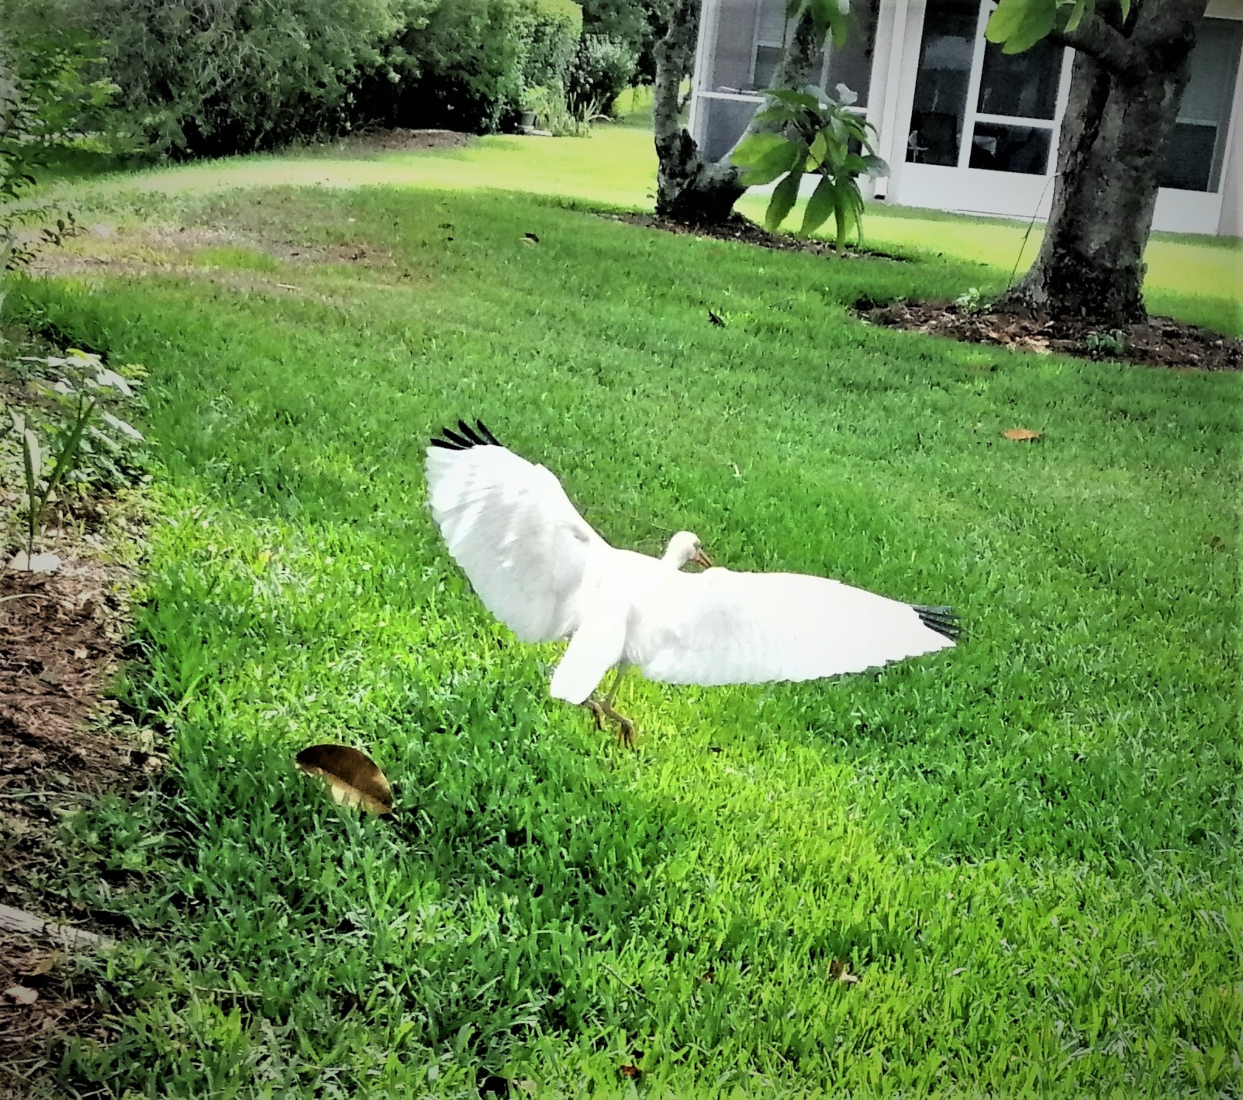 A Floridian ibis hovers over green residential grass in Lecanto, FL.